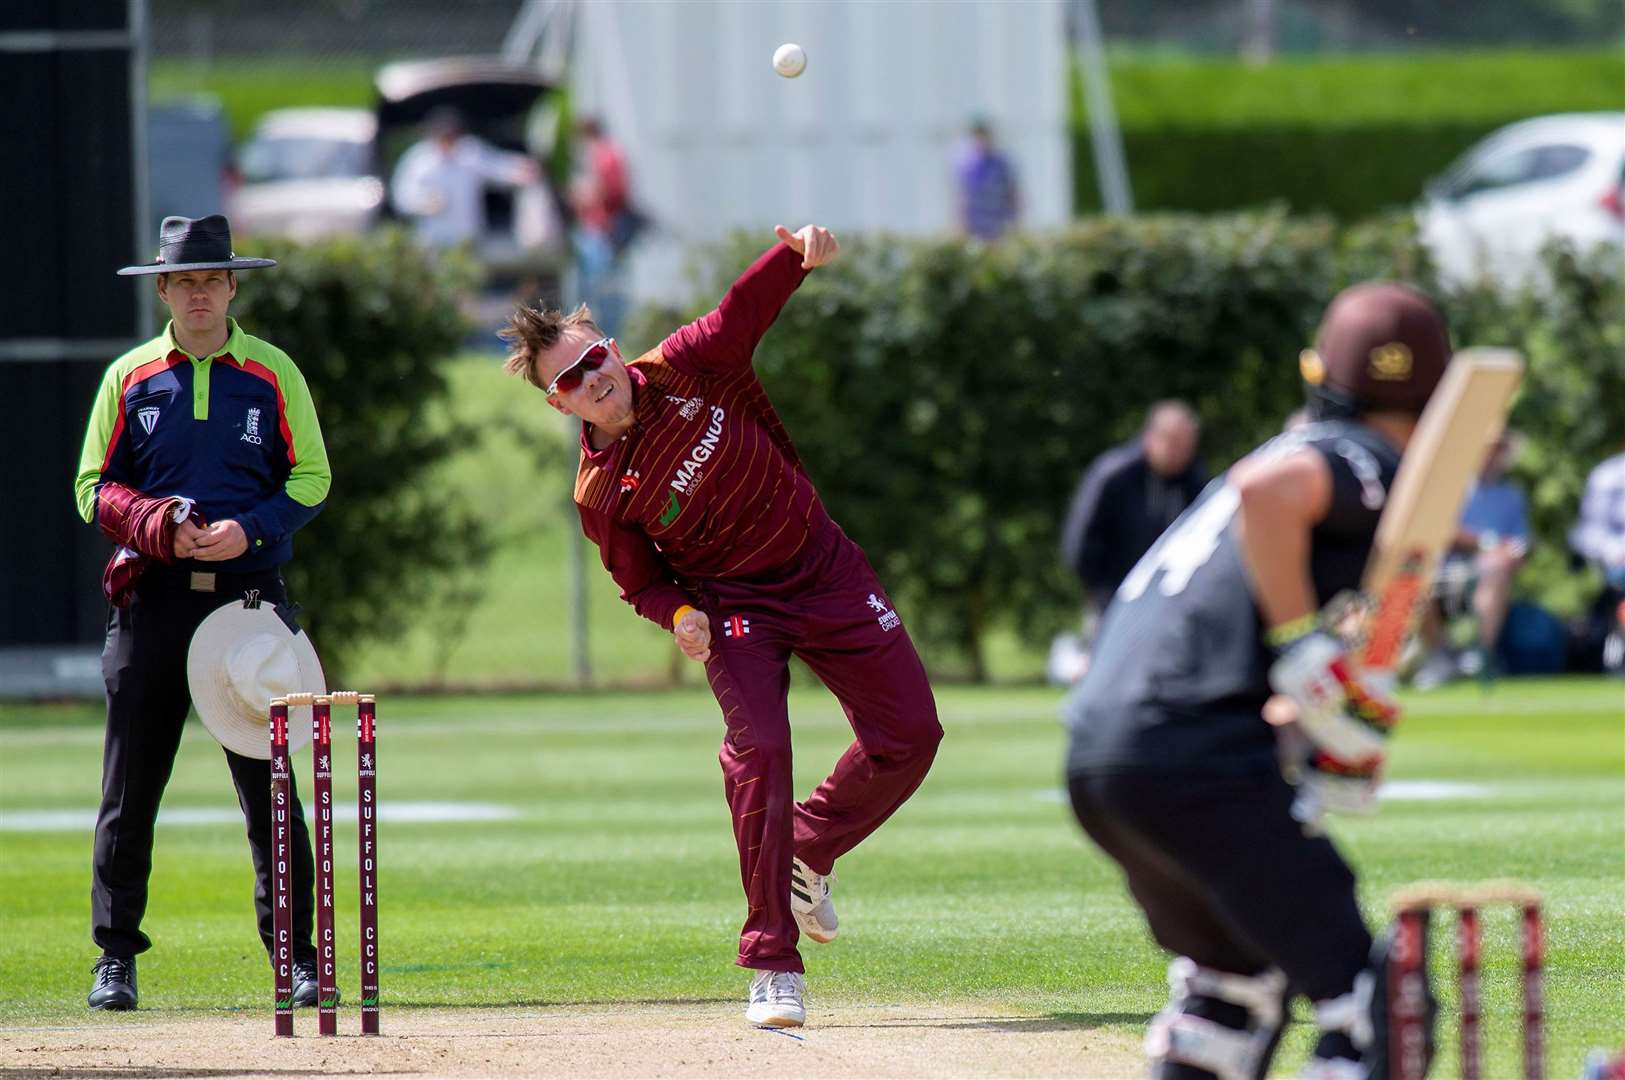 Jack Beaumont’s bowling was praised by Surrey’s director of cricket Alec Stewart Picture: Mark Westley